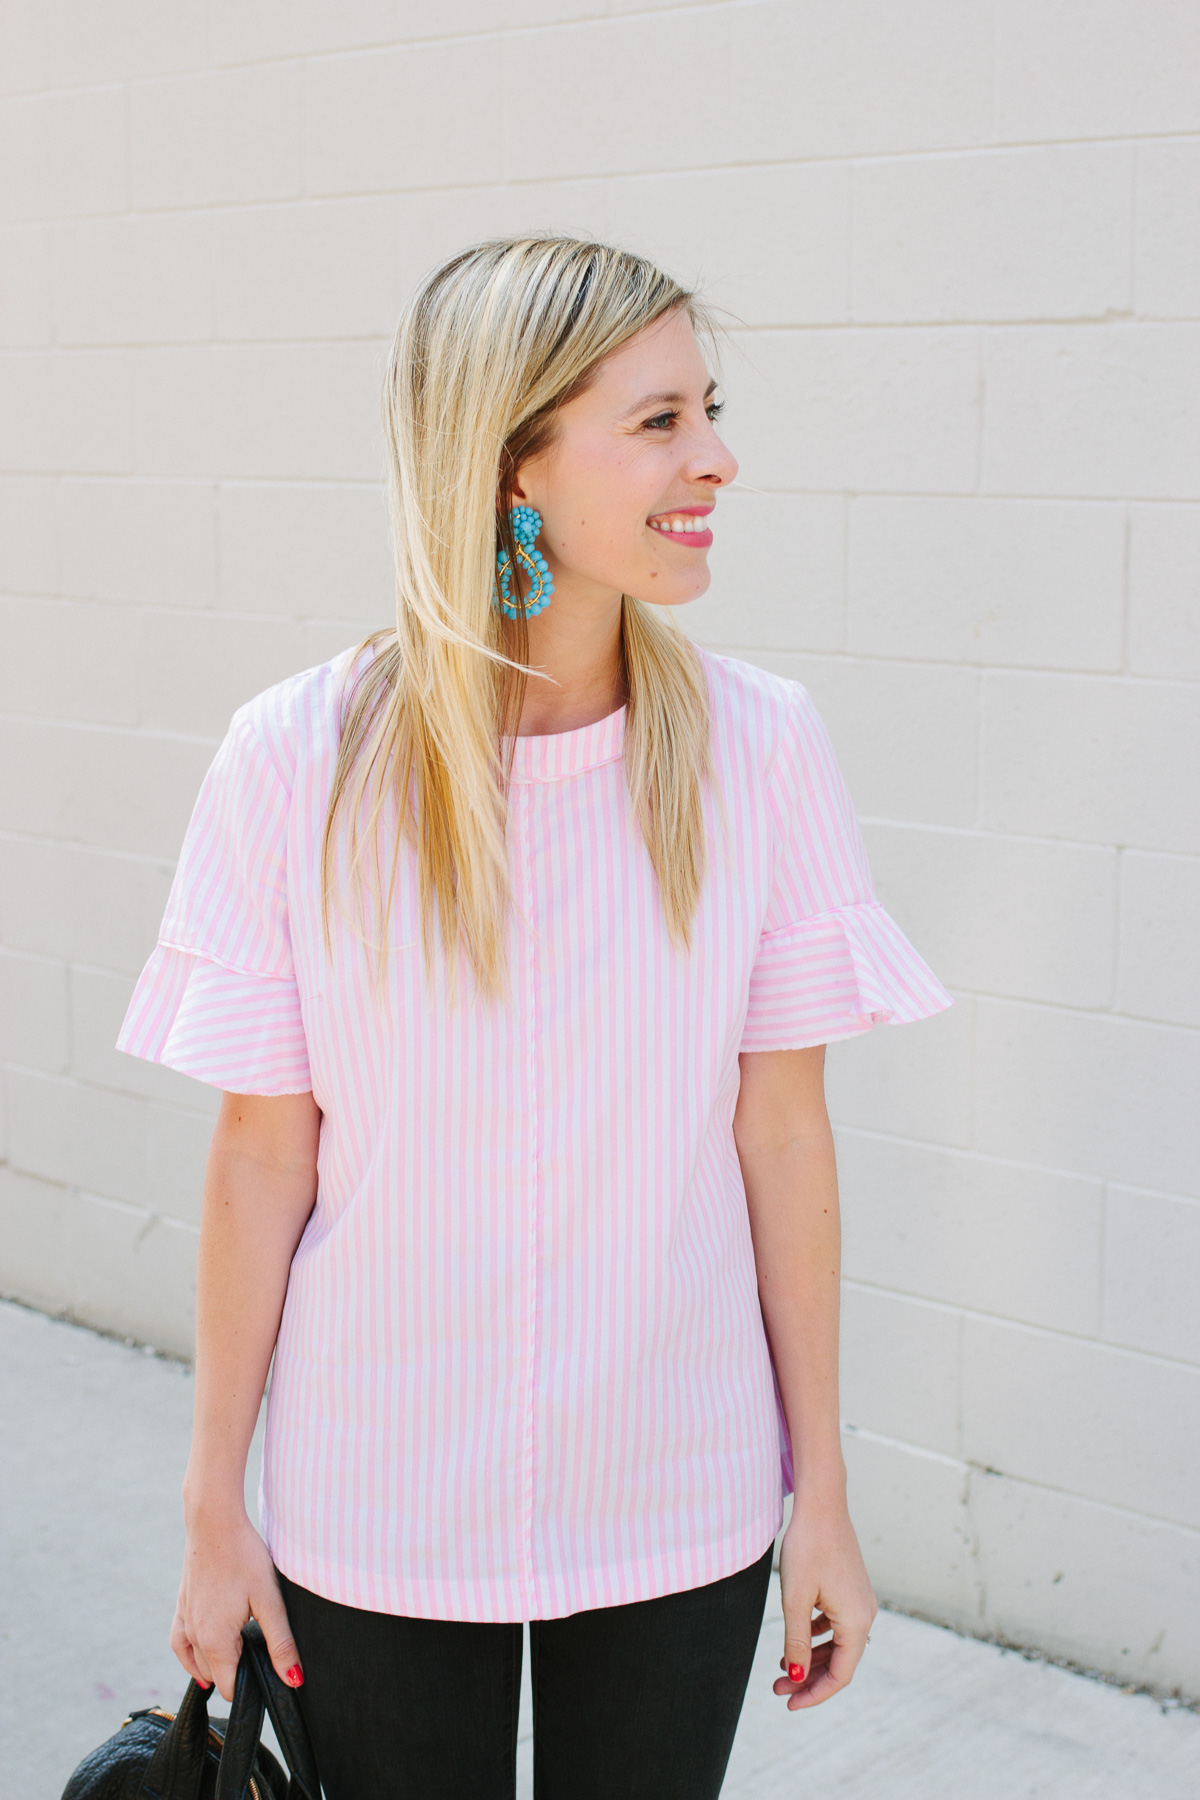 Stripe and Ruffle Top with Statement Earrings